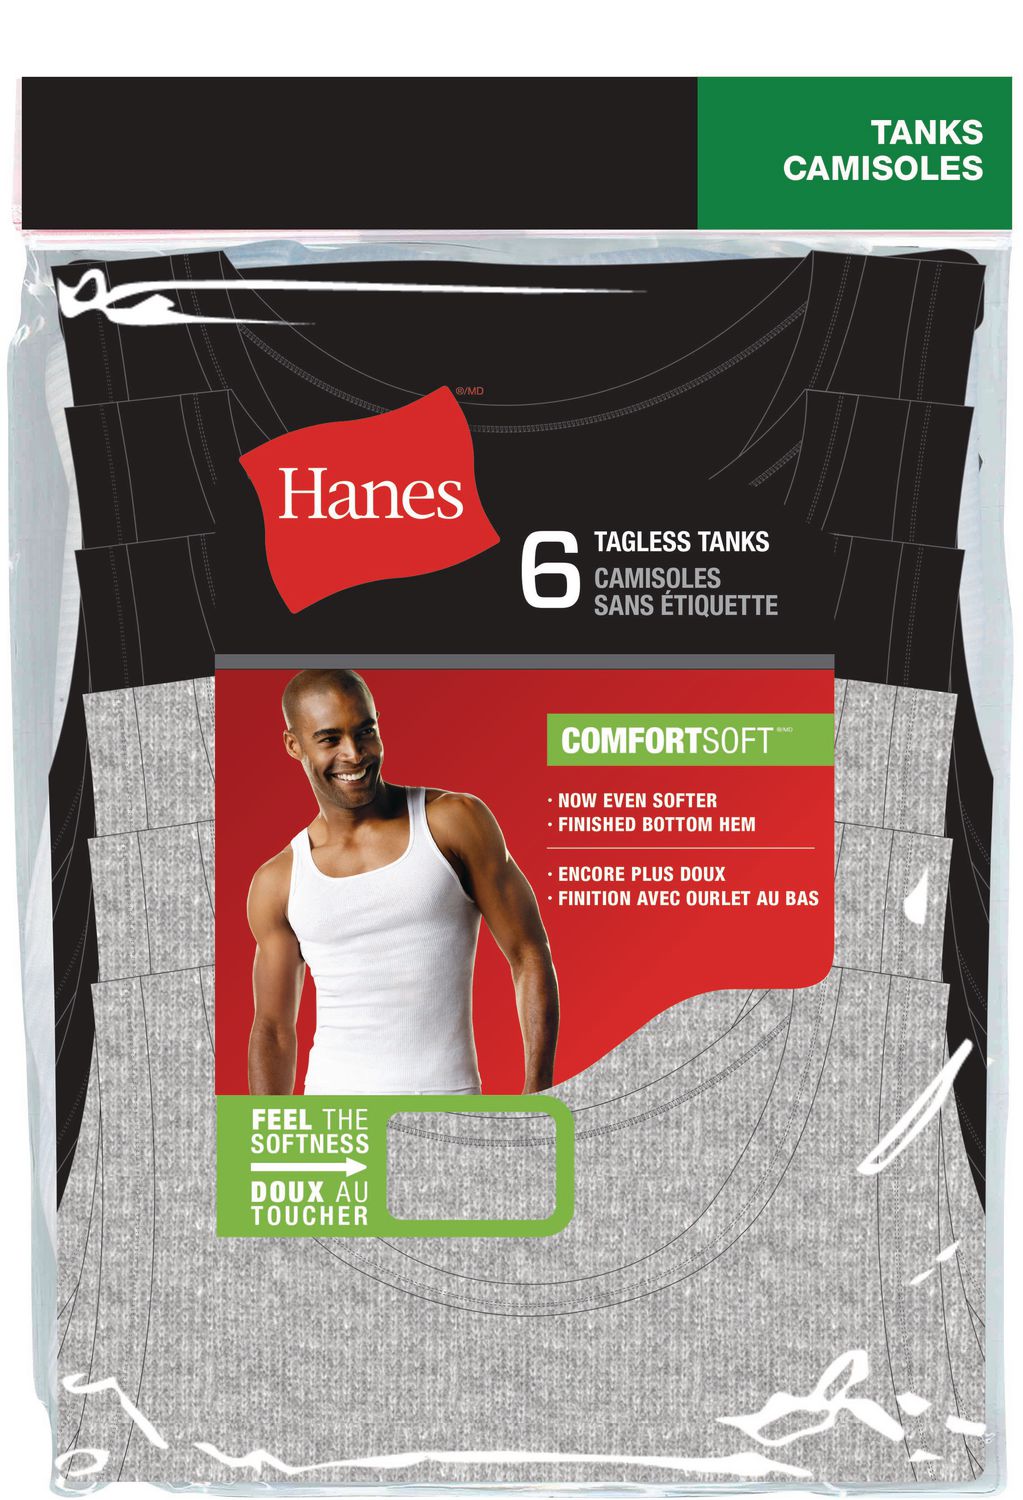 8 men's tank tops and A-shirts: Hanes, J.Crew, and more - Reviewed